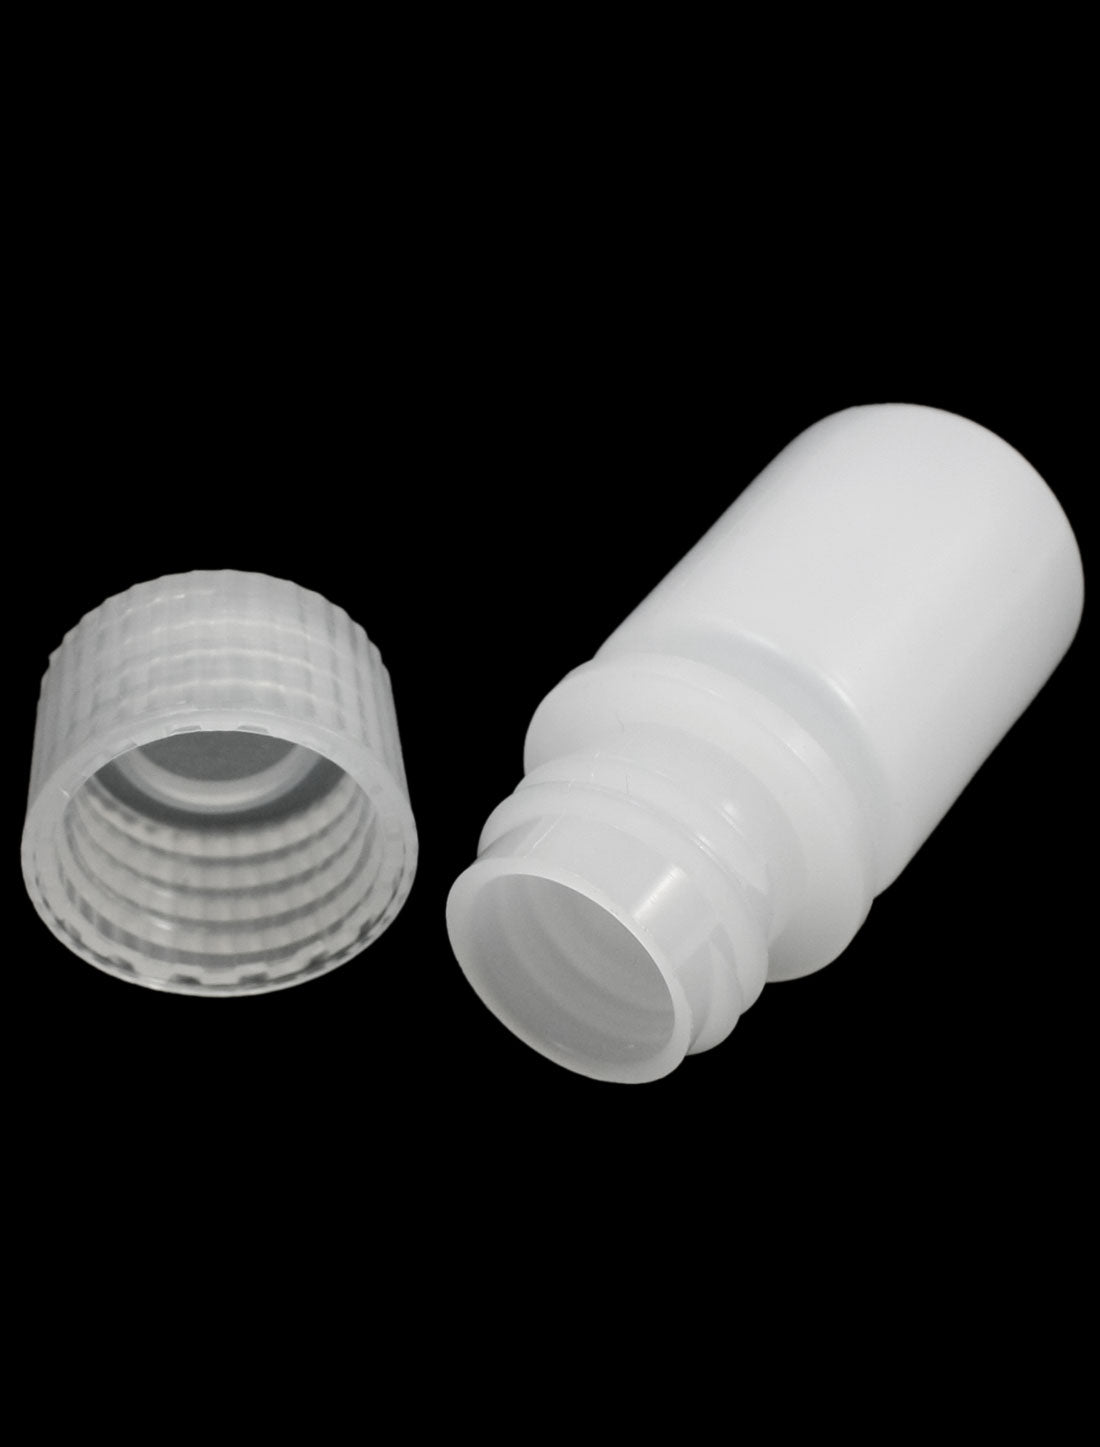 uxcell Uxcell Screw Lid 10mL Chemicals Storage Container White Plastic Reagent Bottle